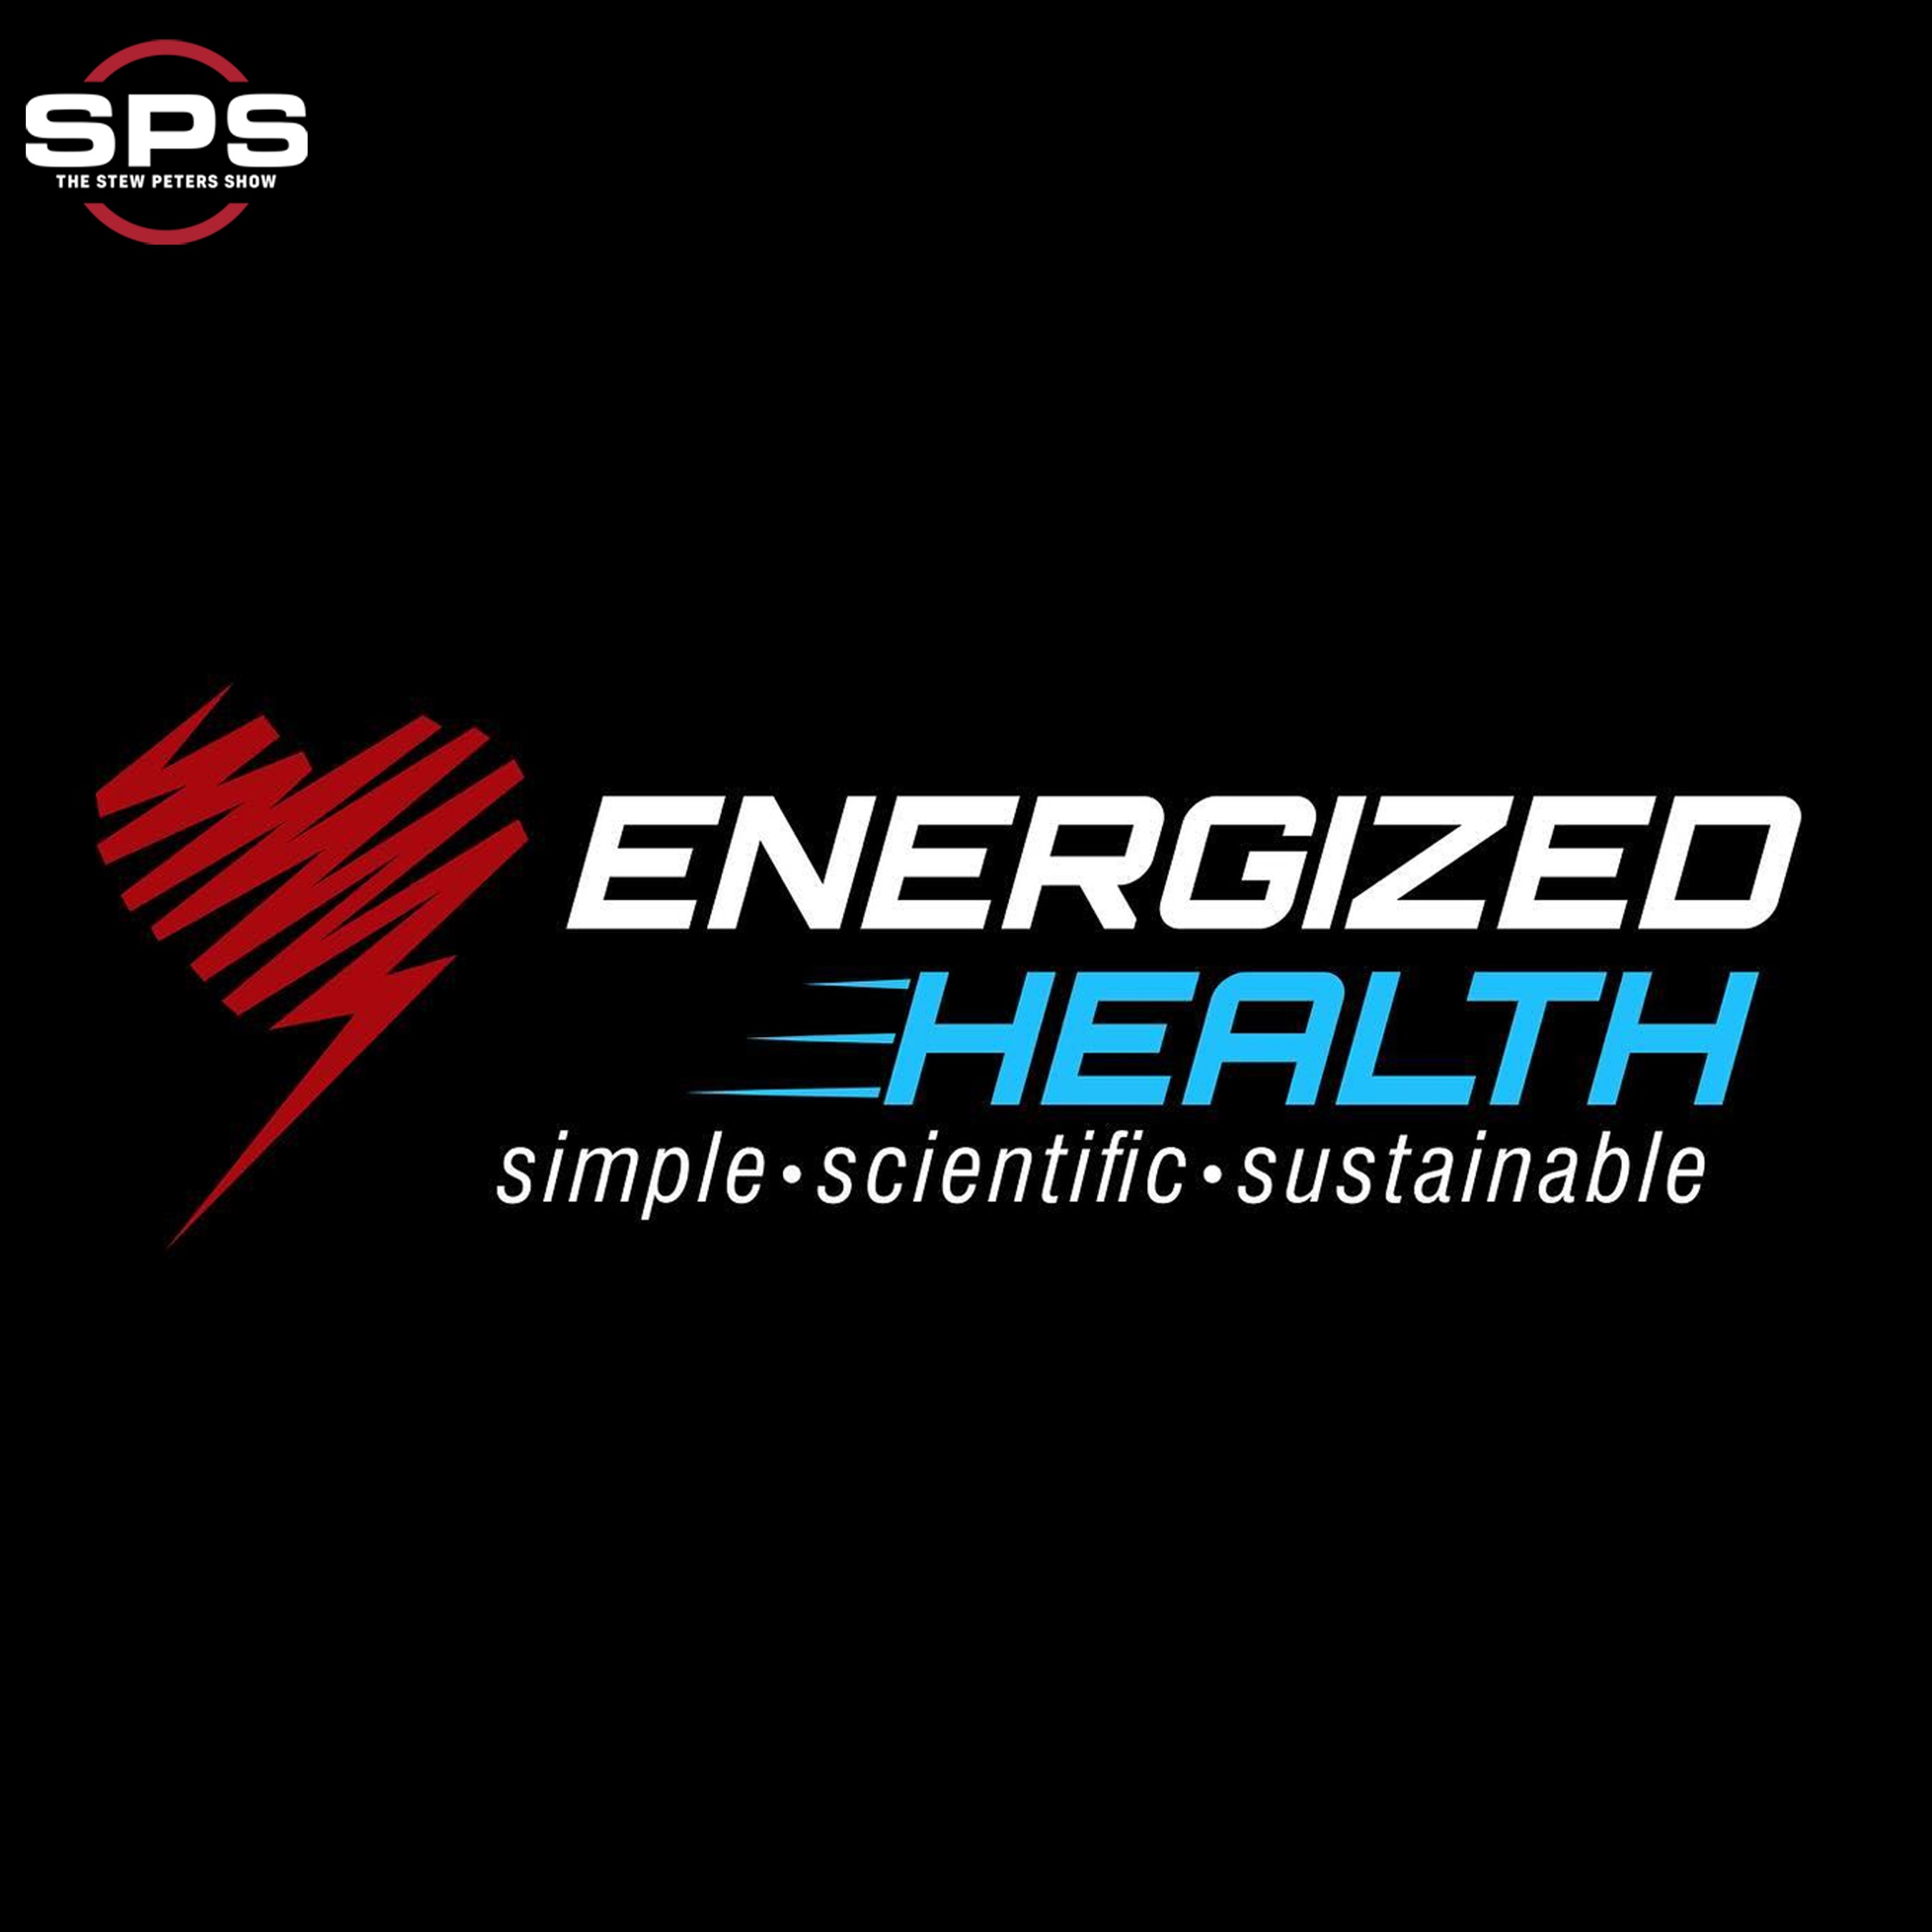 Energized Health COMPLETELY Transforms Wellbeing: Inner Cellular Hydration Yields Lifesaving Results